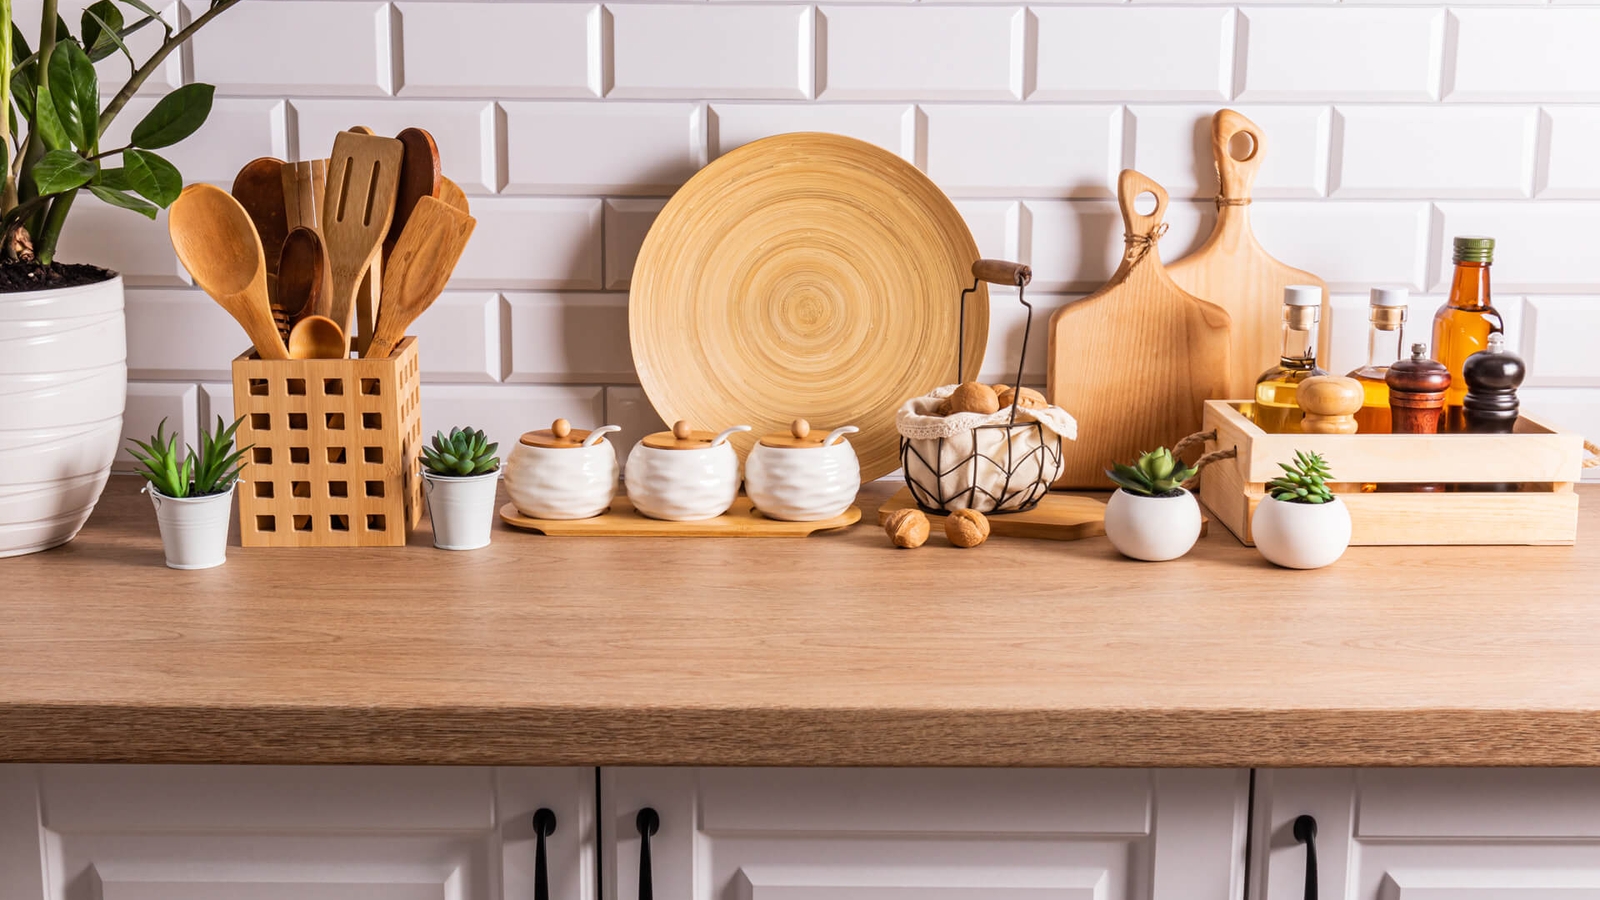 A wooden kitchen countertop with kitchen utensils, chopping boards and oils